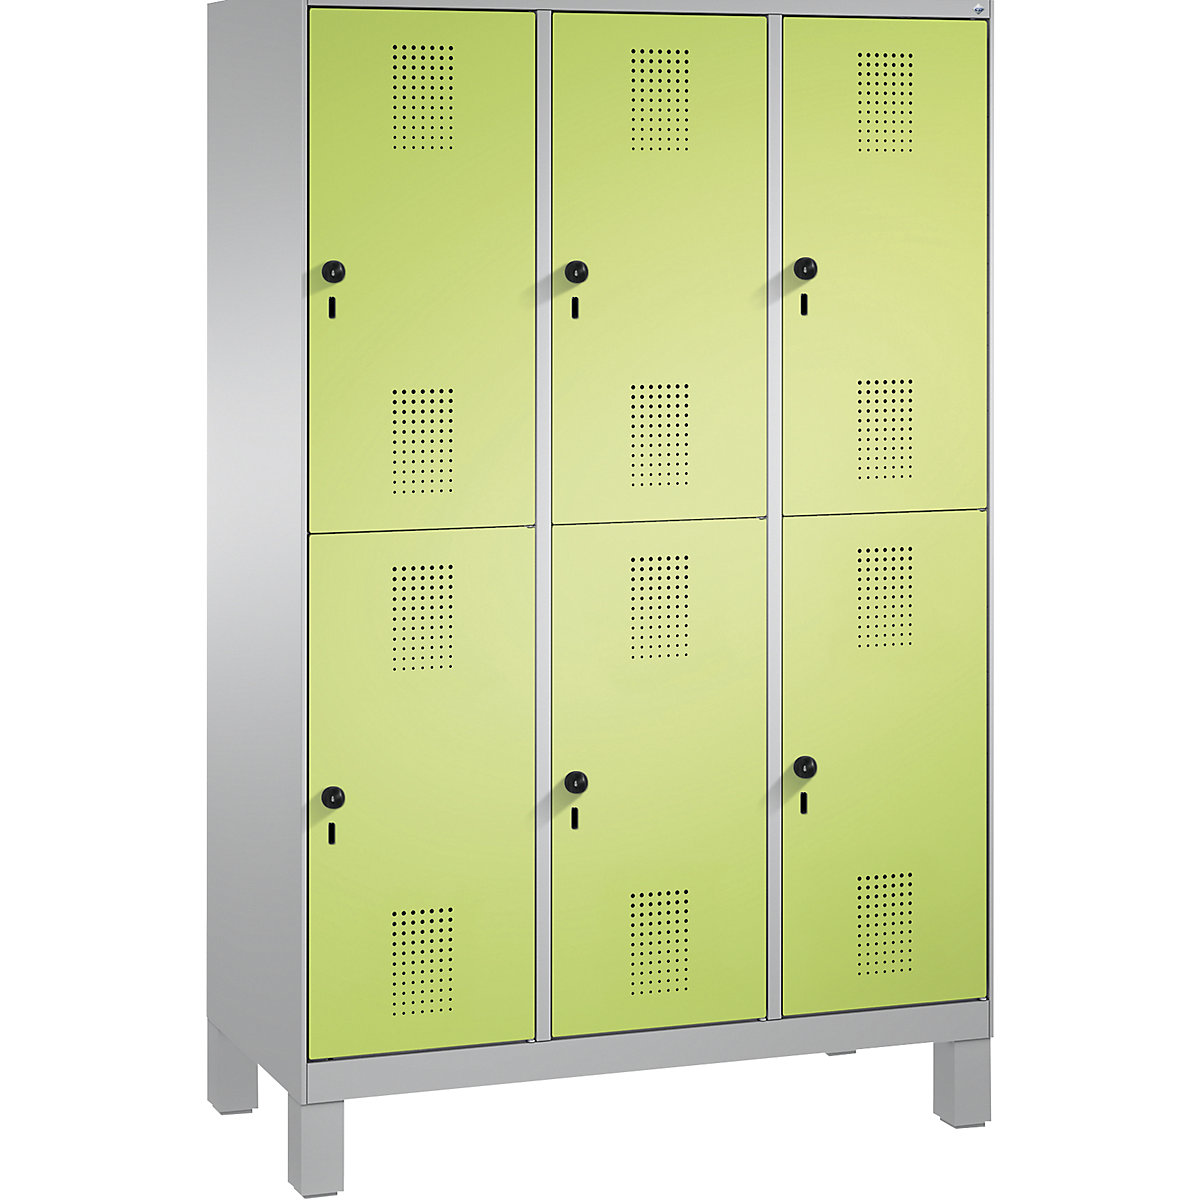 EVOLO cloakroom locker, double tier, with feet – C+P, 3 compartments, 2 shelf compartments each, compartment width 400 mm, white aluminium / viridian green-9